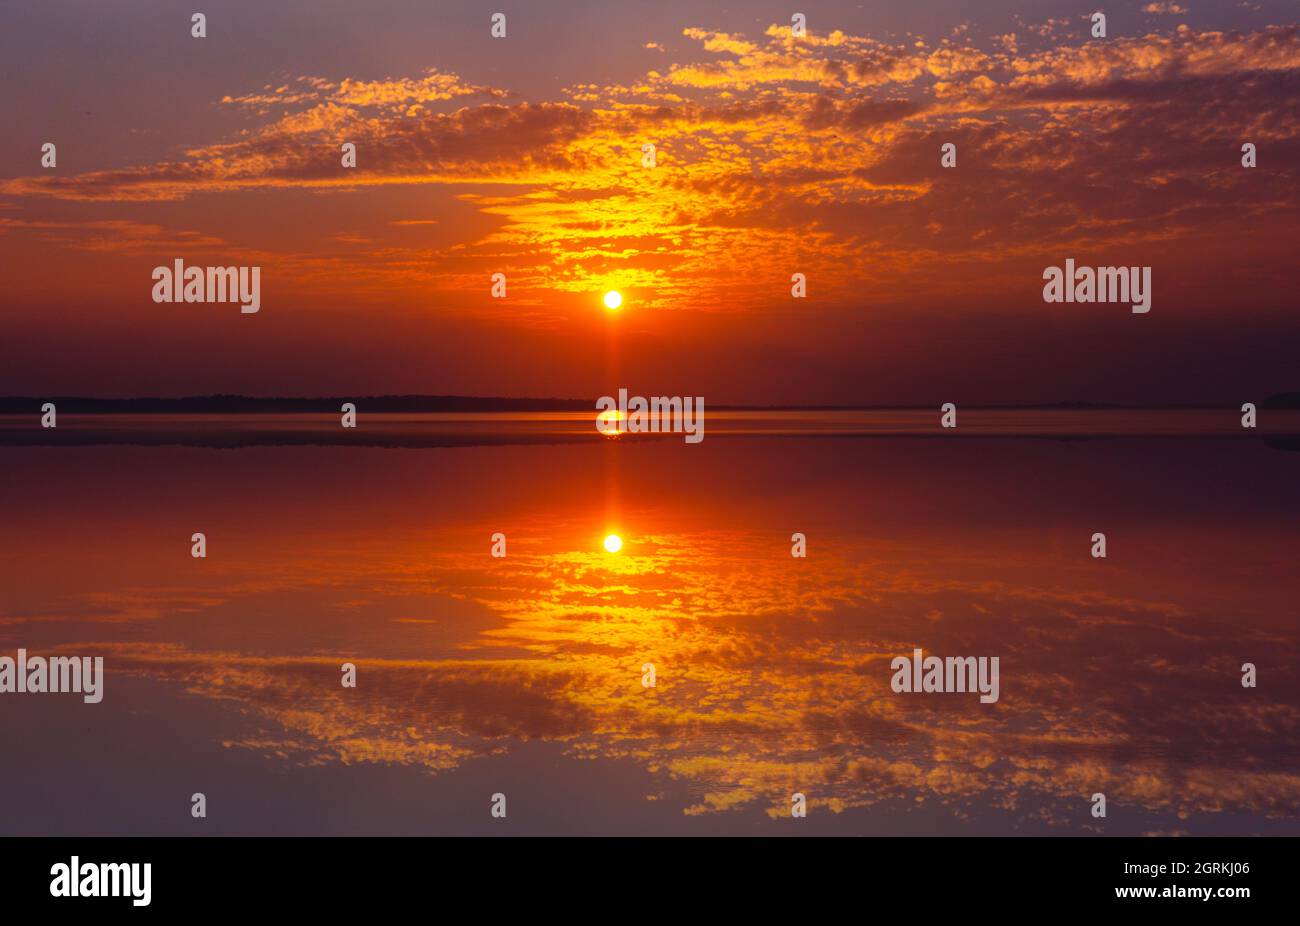 Orange And Gold Sky At Sunset Reflecting In Perfect Lake Stock Photo